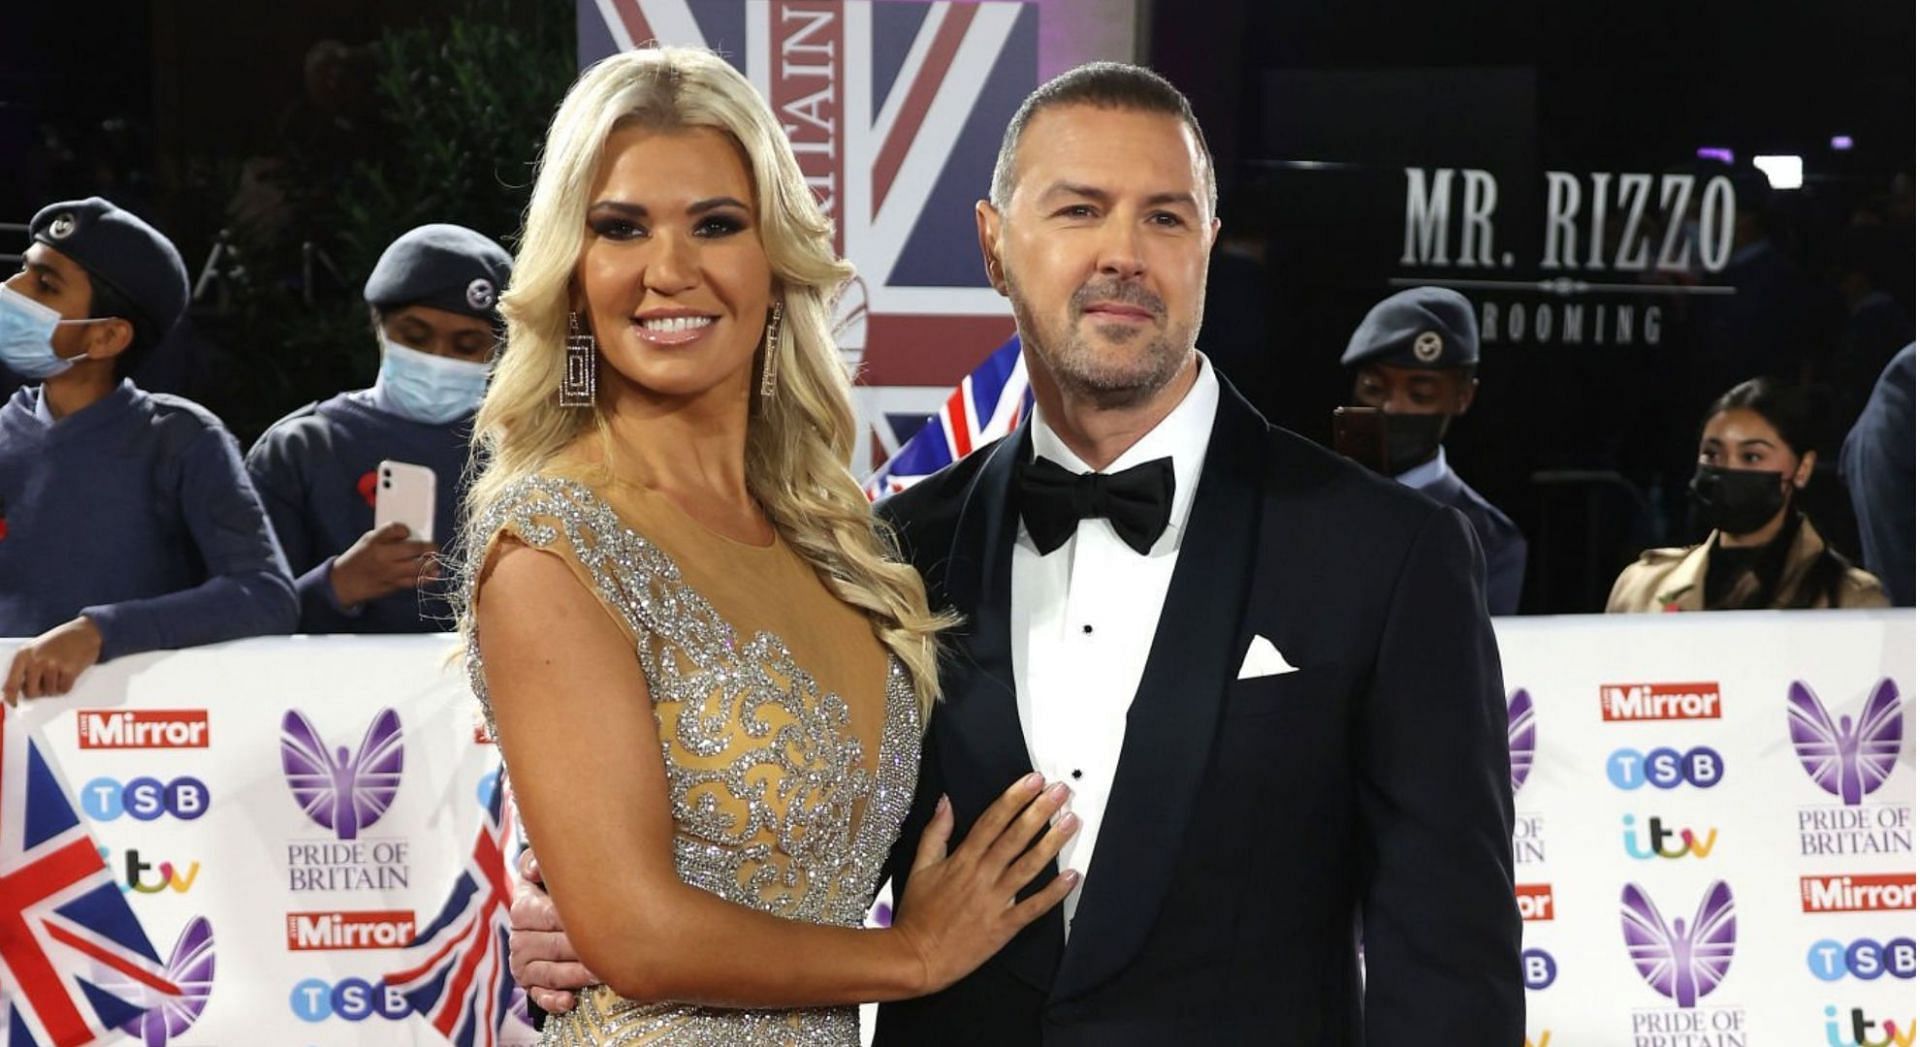 Christine and Paddy McGuinness have parted ways after 11 years of marriage (Image via Getty Images)